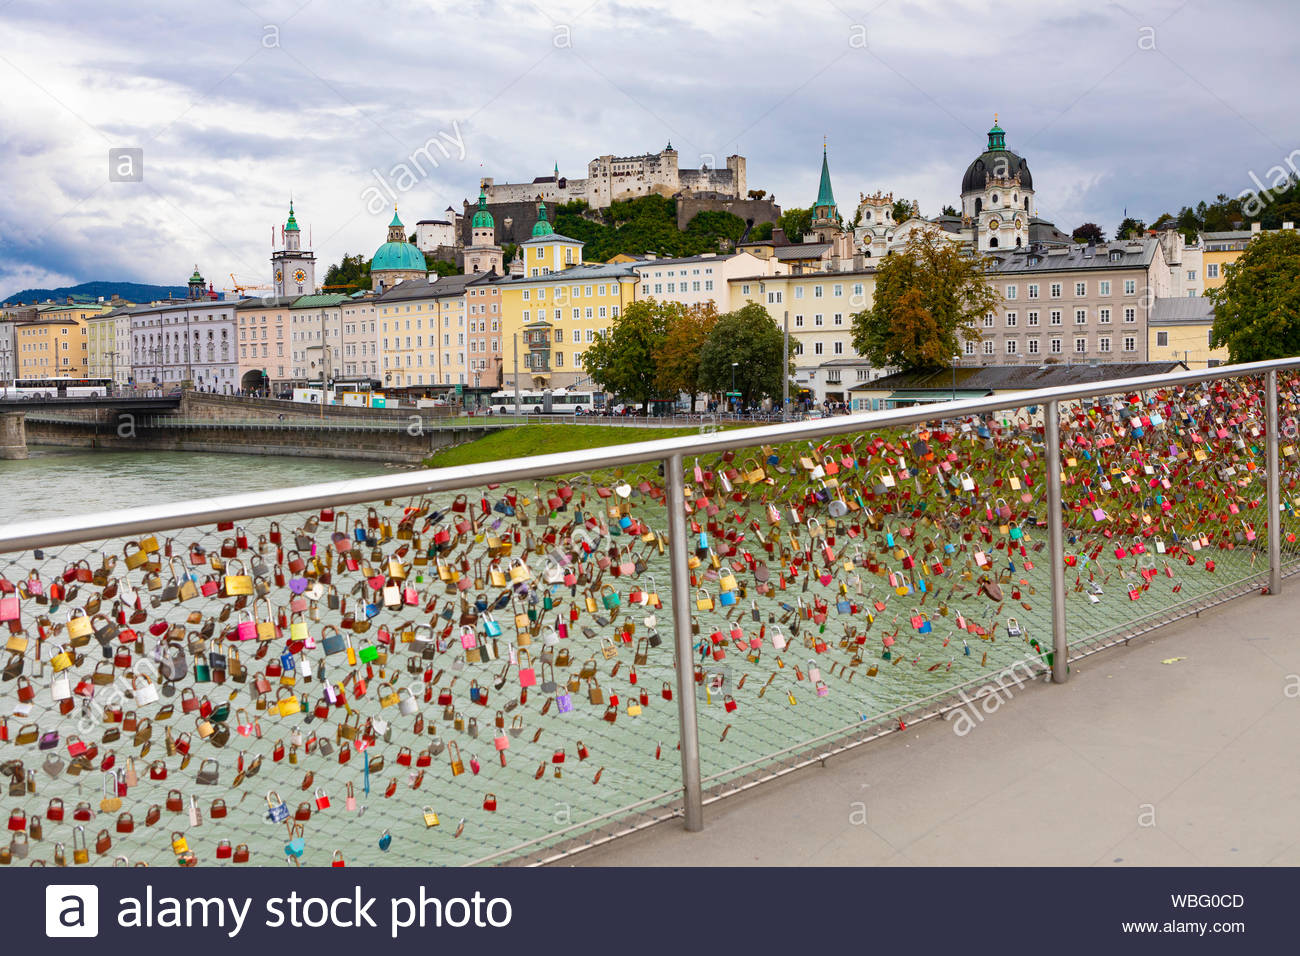 Wide Angle Of Salzburg City With Castle In The Background And